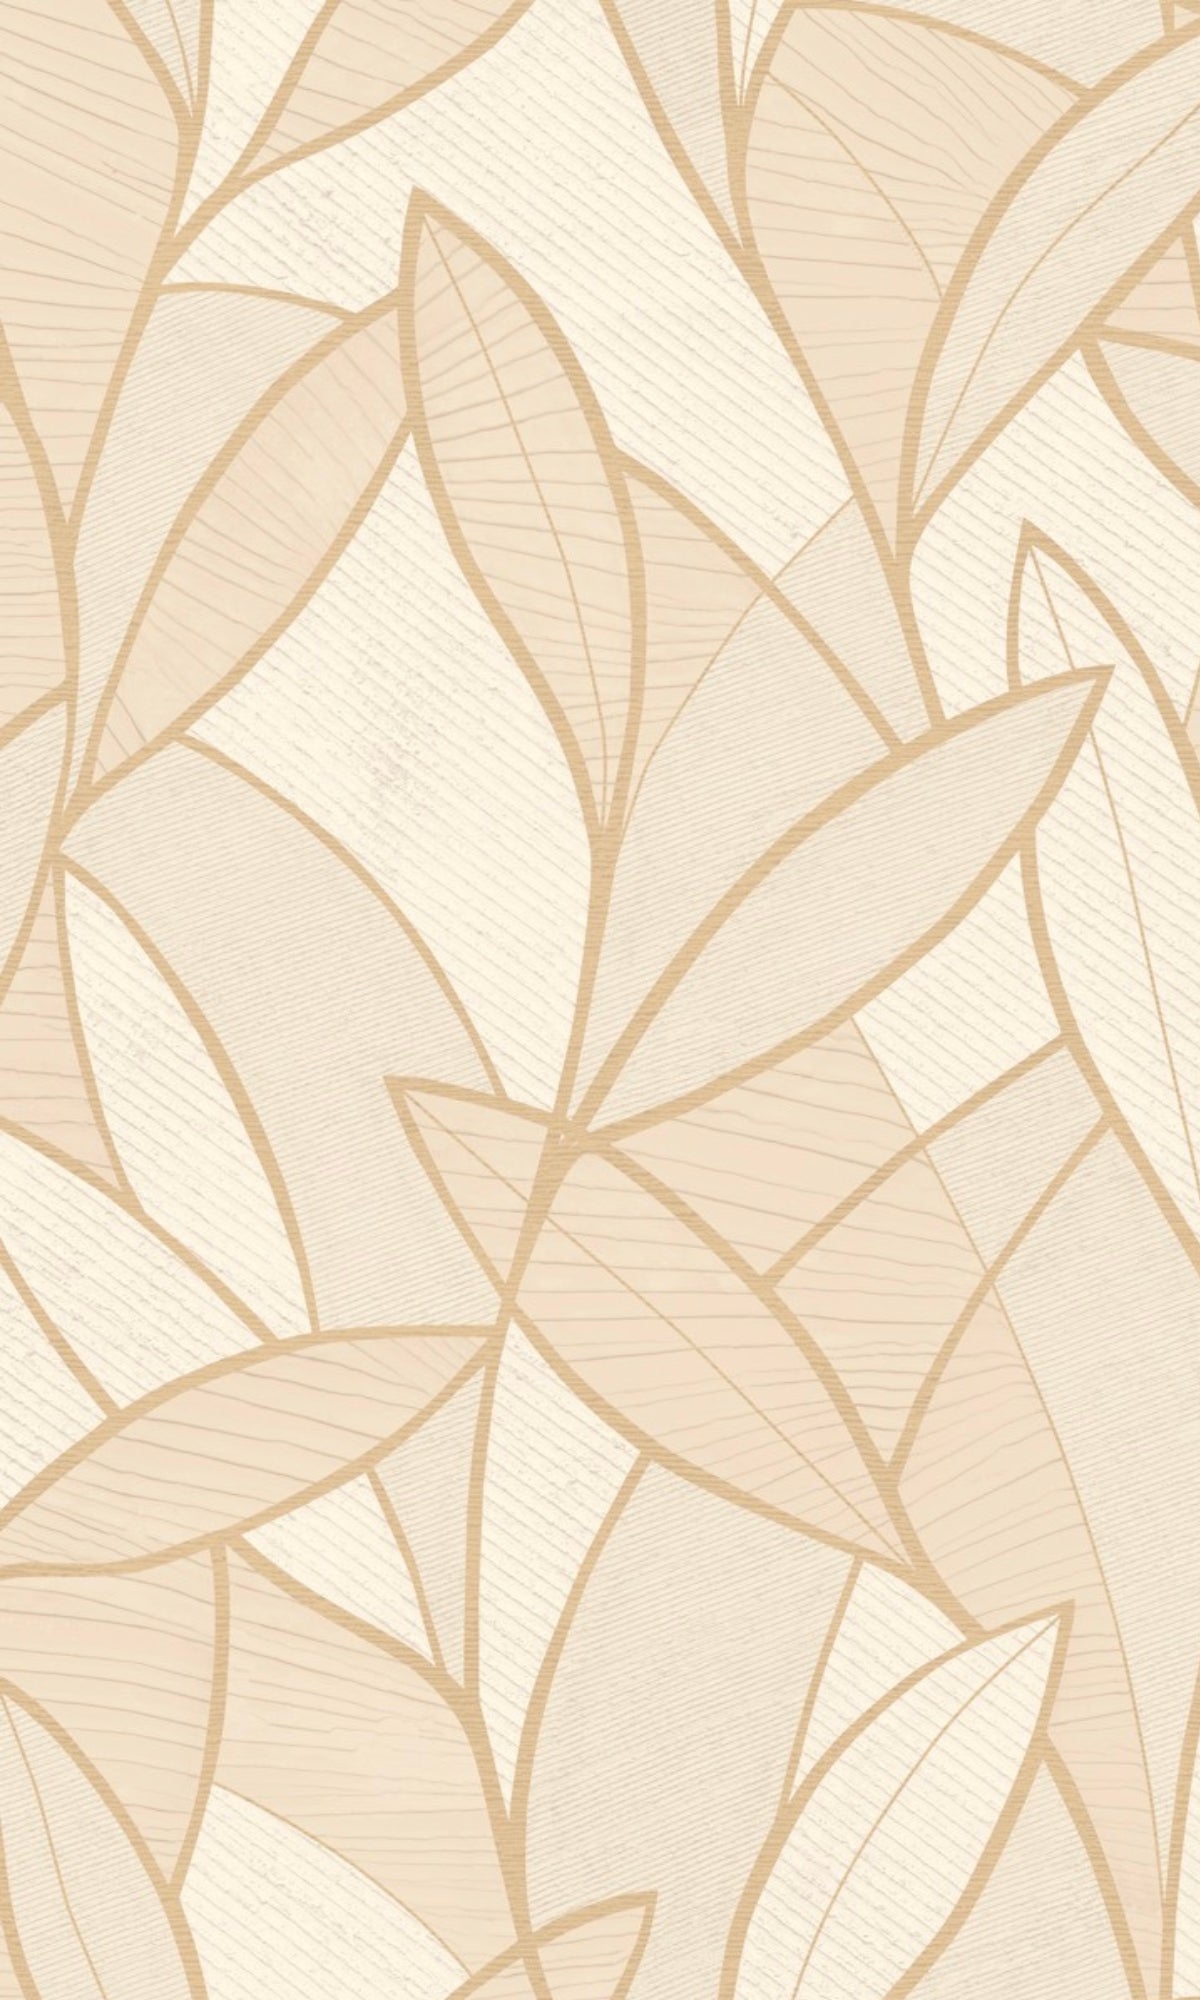 Beige Leaf Motif With Outlines Tropical Wallpaper R9034